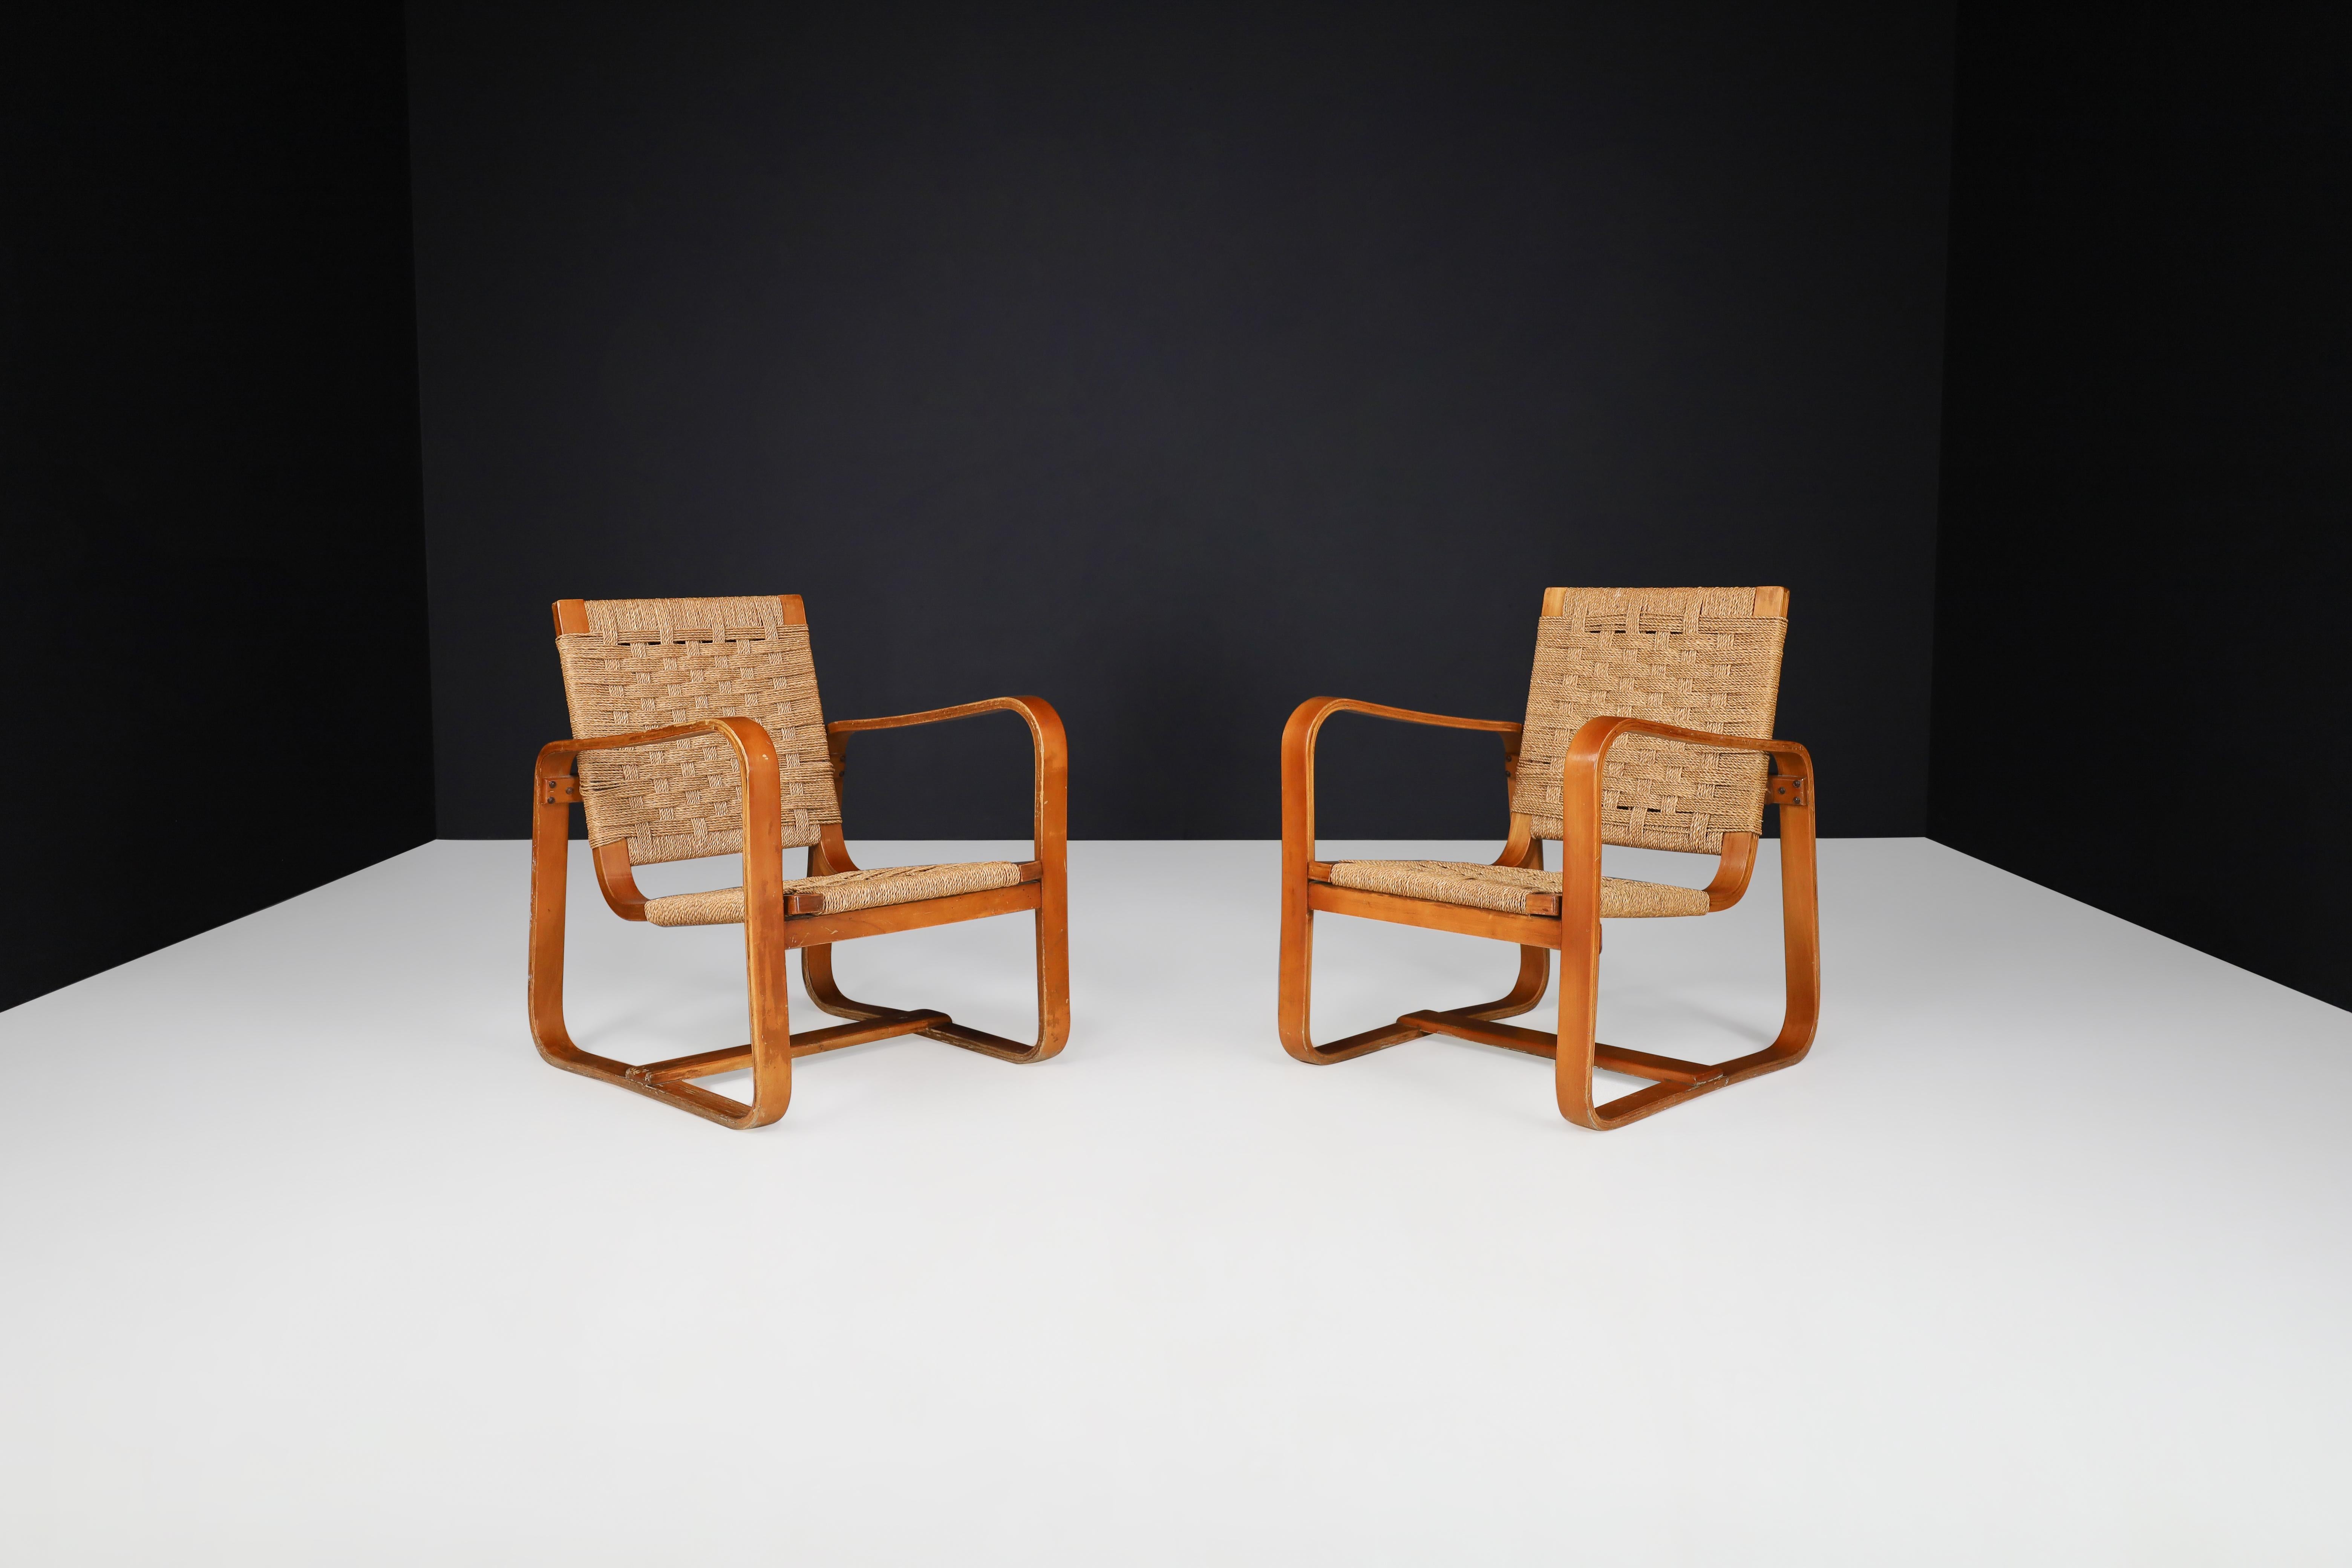 Giuseppe Pagano Pogatschnig. 'Bocconi' Armchairs, Italy, 1940s For Sale 2